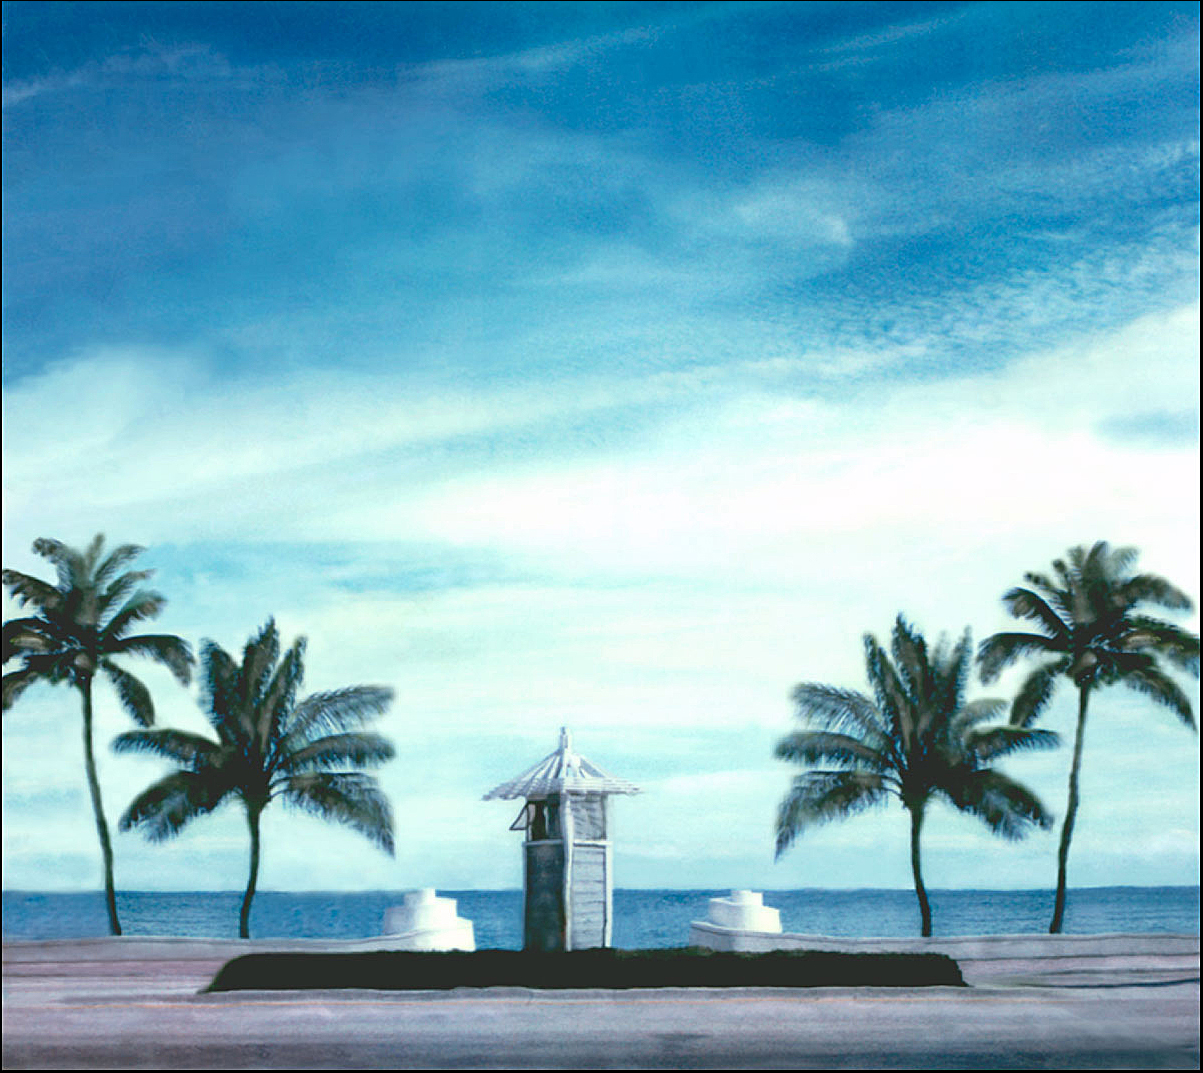 "My Front Yard" <br>Old-Style Lifeguard Stand, Palms and Wall, Ft Lauderdale Beach, FL